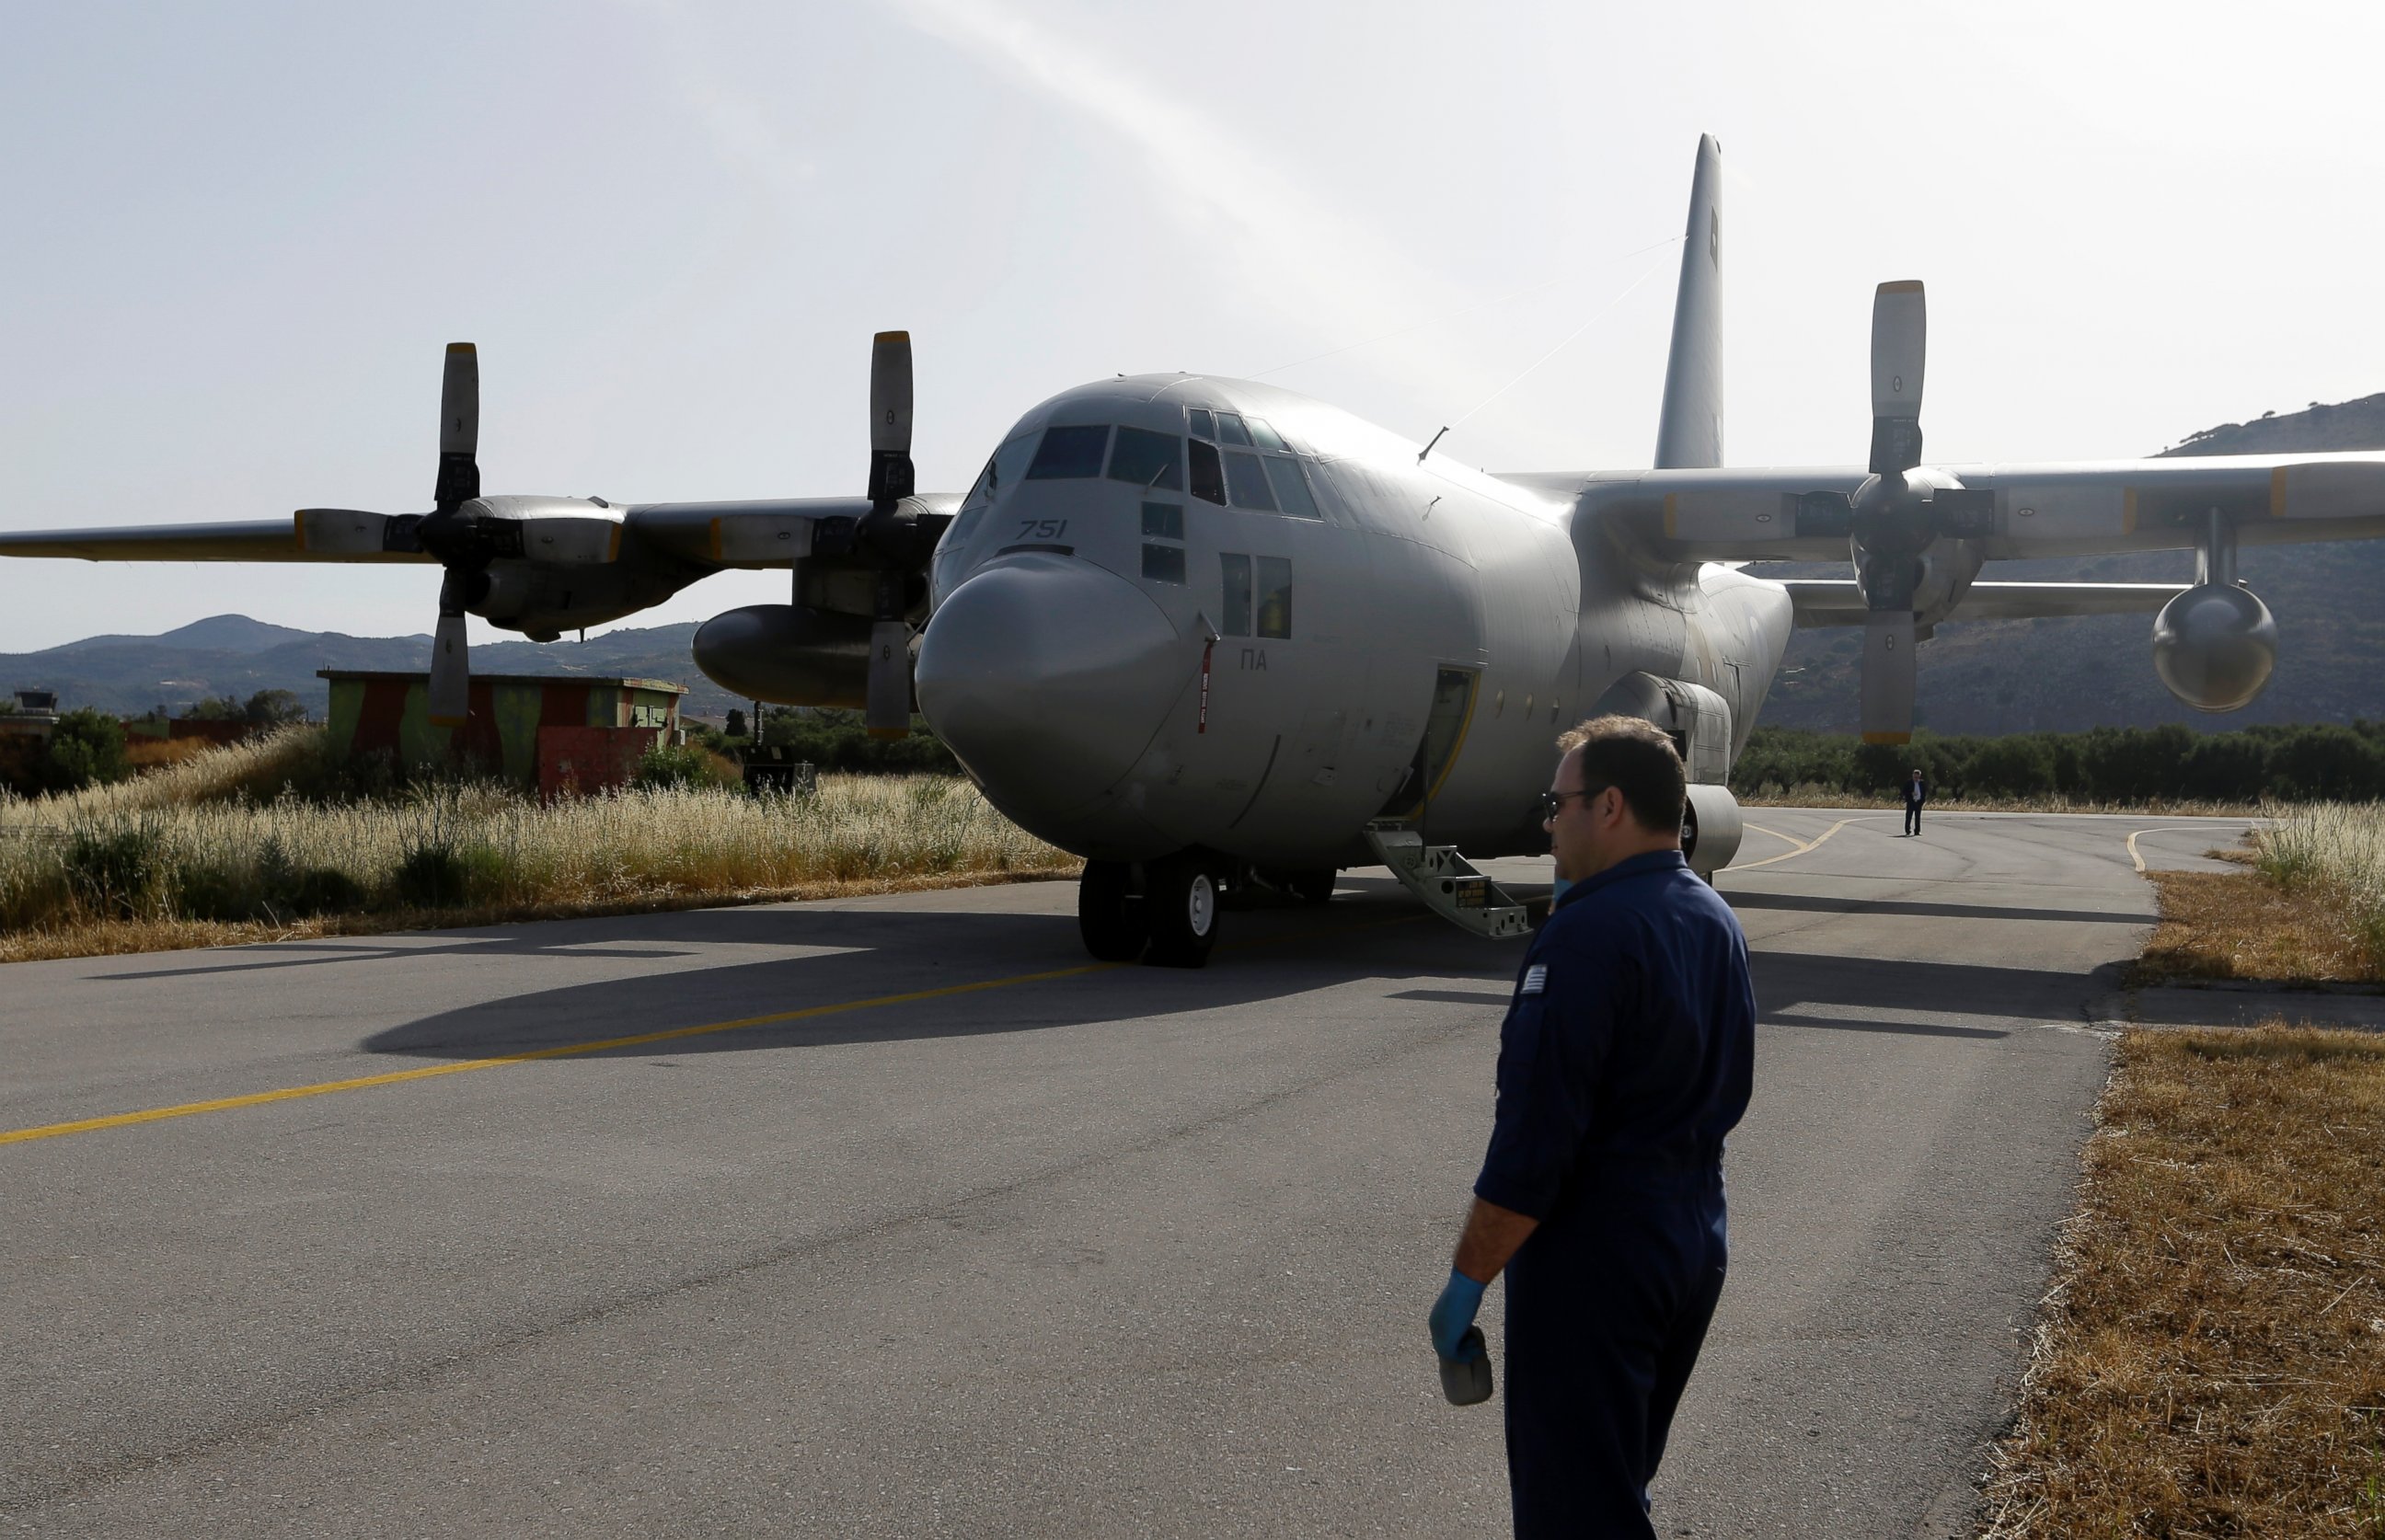 PHOTO: An engineer stands in front of a C-130 HAUP of the Hellenic Air Force, which took part in the searching operation of the missing Egypt plane, at the military air base of Kastelli on the southern Greek island of Crete, May 20, 2016.